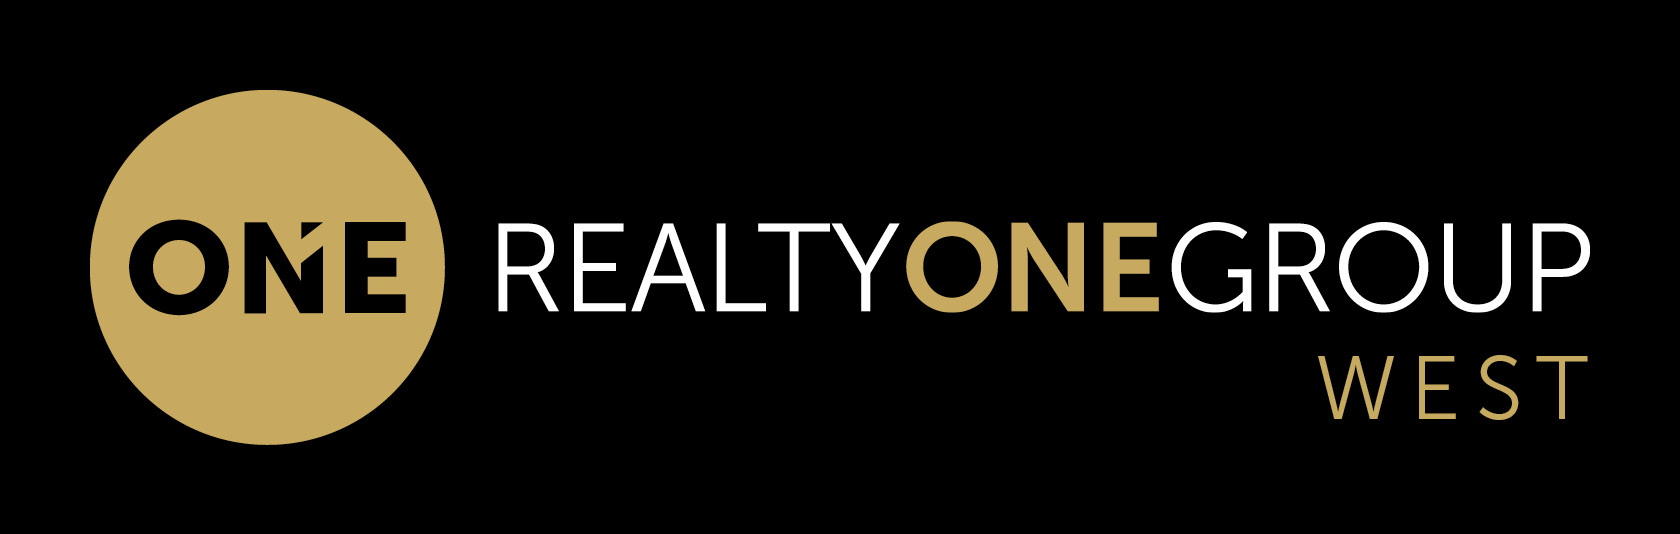 Realty-one-group